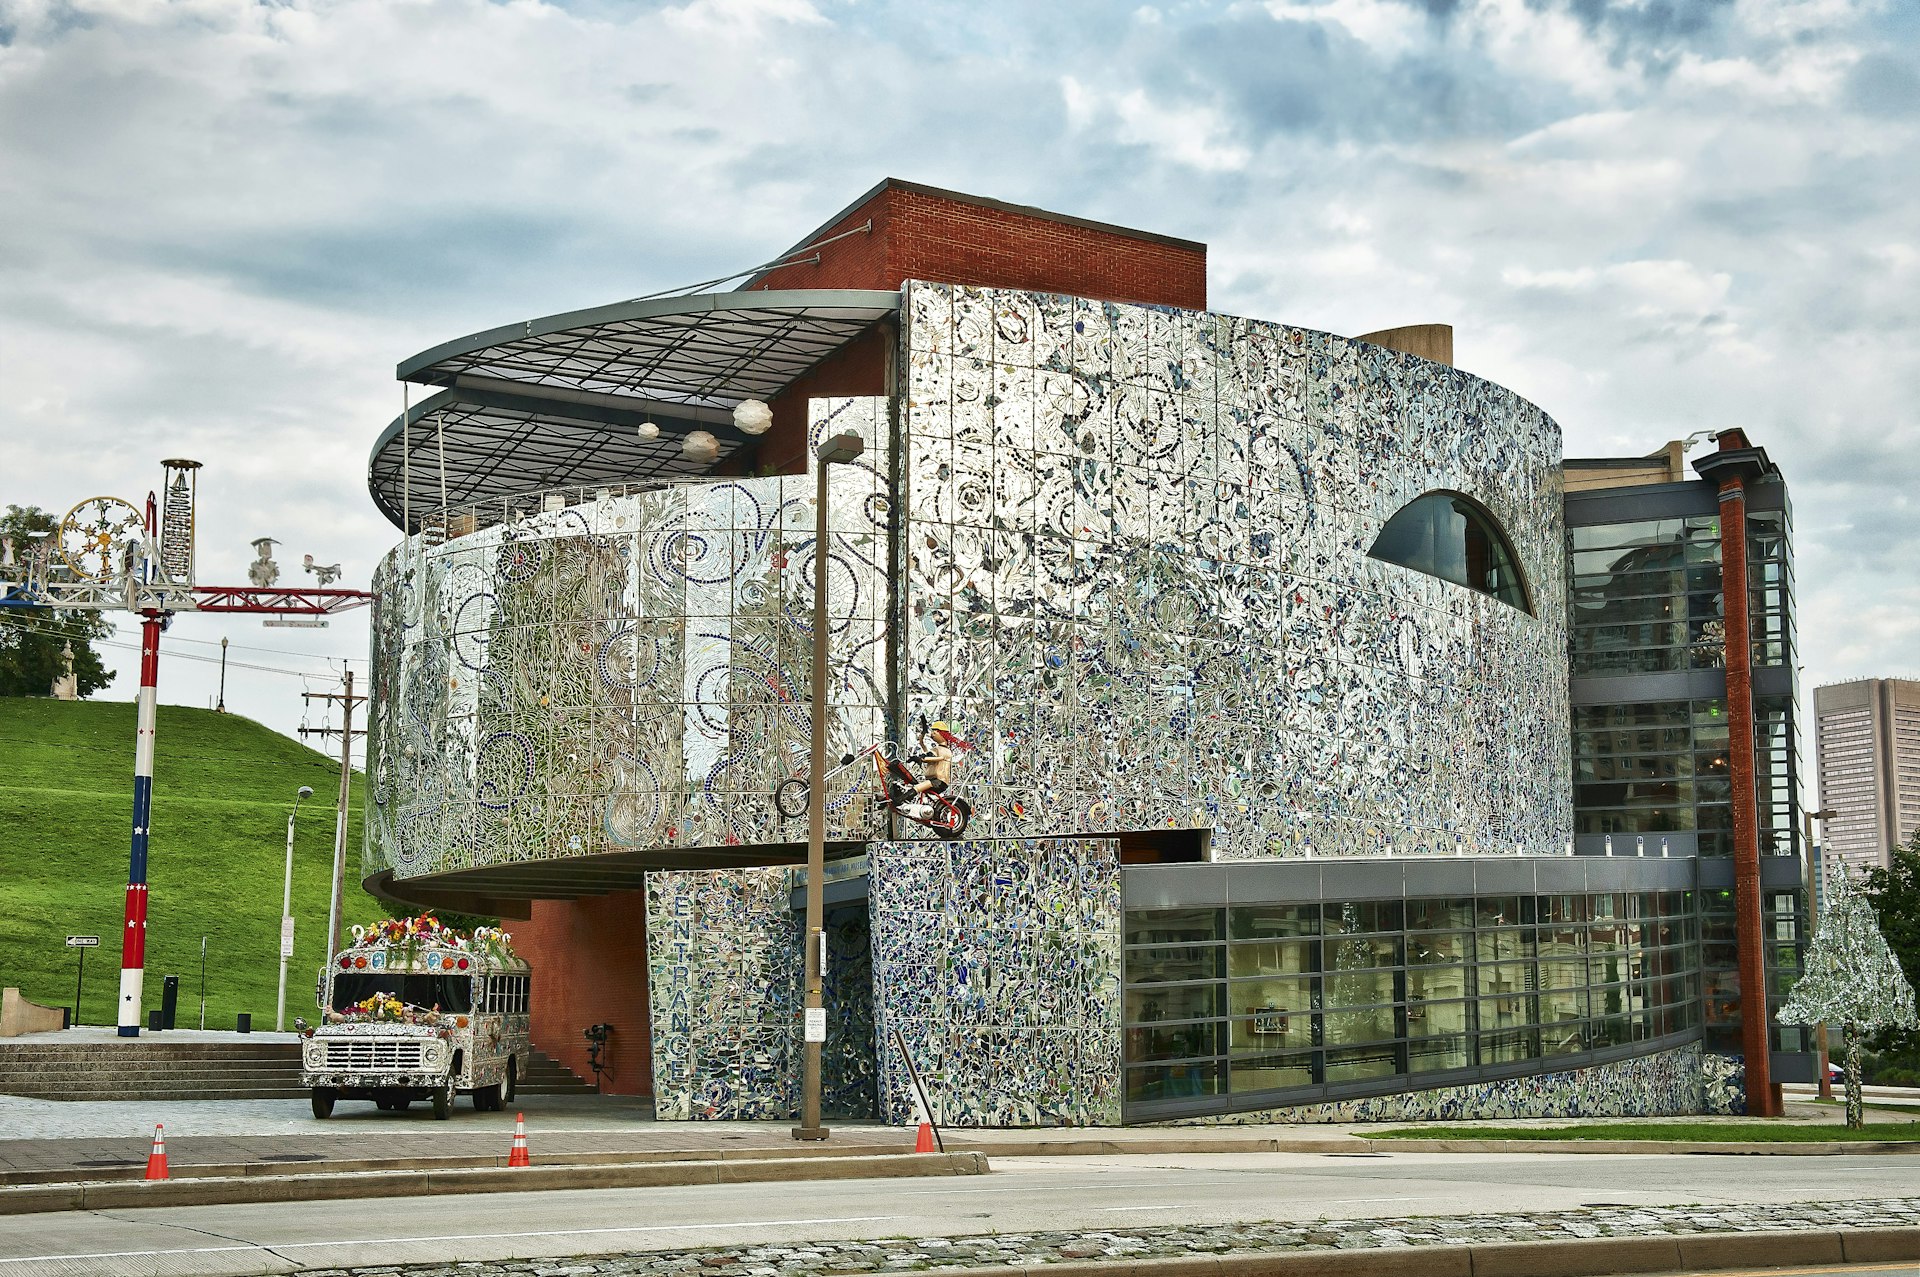 BALTIMORE, MARYLAND, UNITED STATES - 2011/08/18: American Visionary Art Museum, Inner Harbor. (Photo by John Greim/LightRocket via Getty Images)